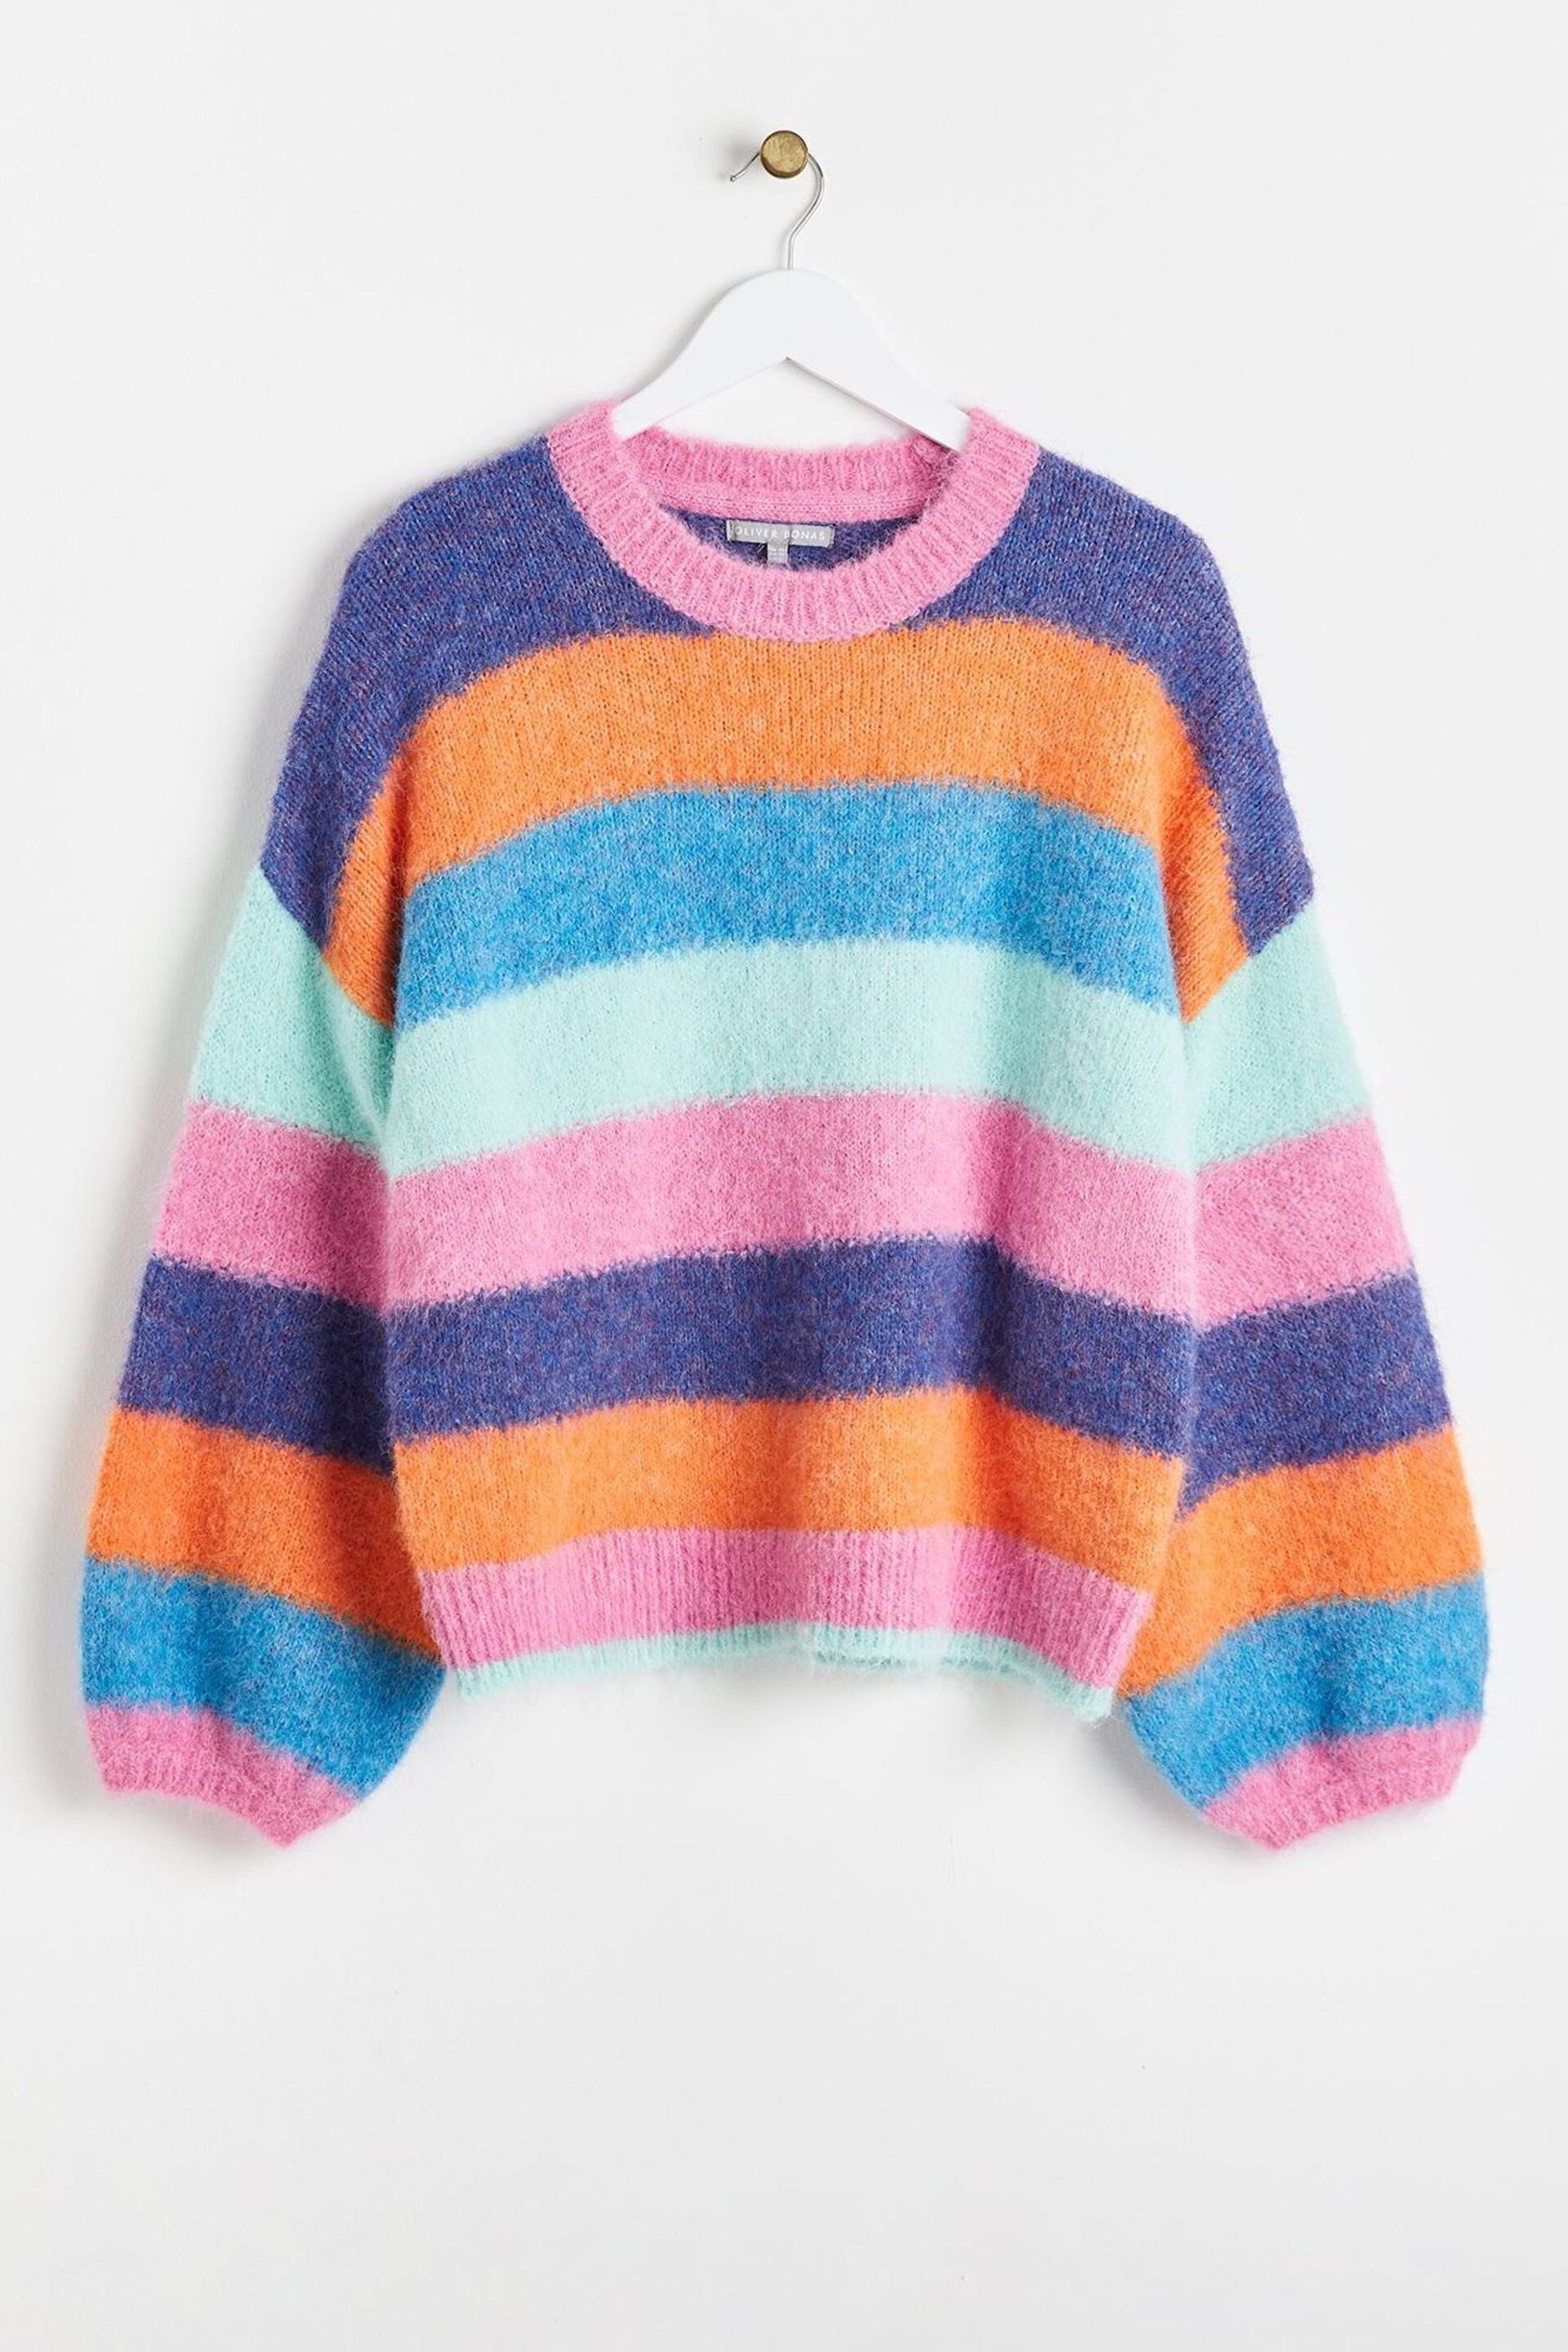 Oliver Bonas Pink Fluffy Rainbow Knitted Jumper - Image 4 of 8